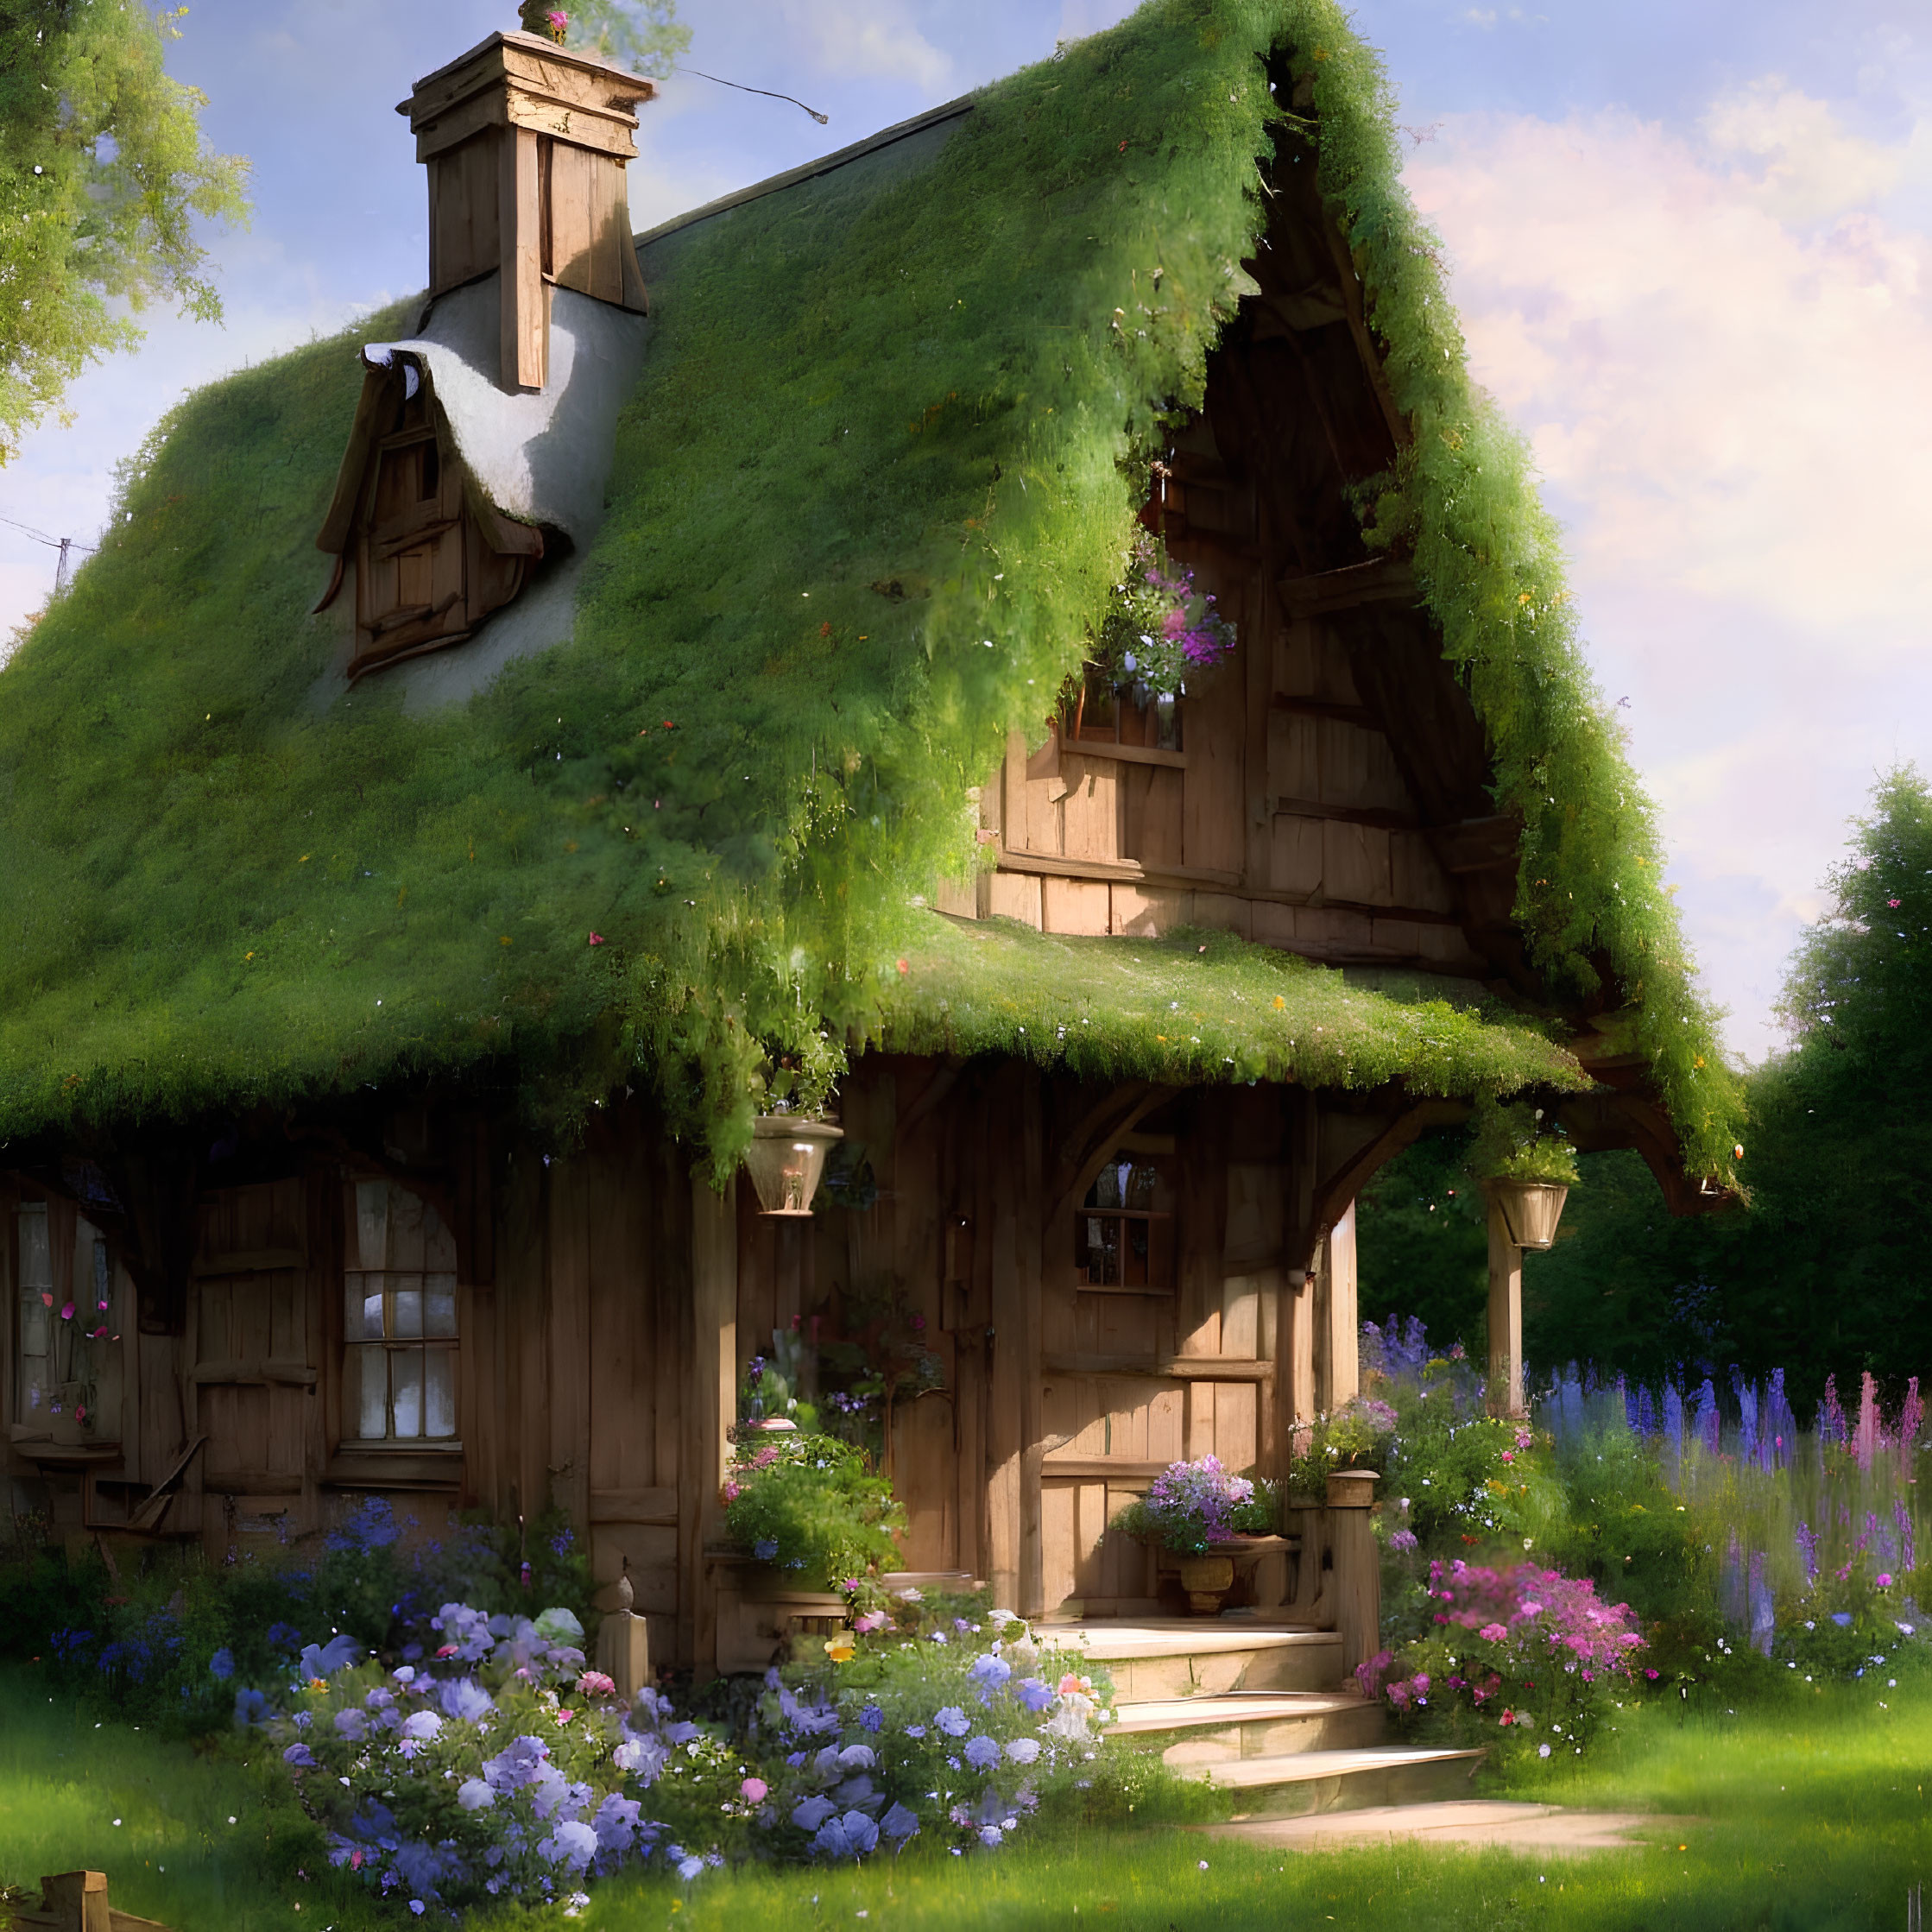 Thatched Roof Cottage Surrounded by Greenery and Flowers